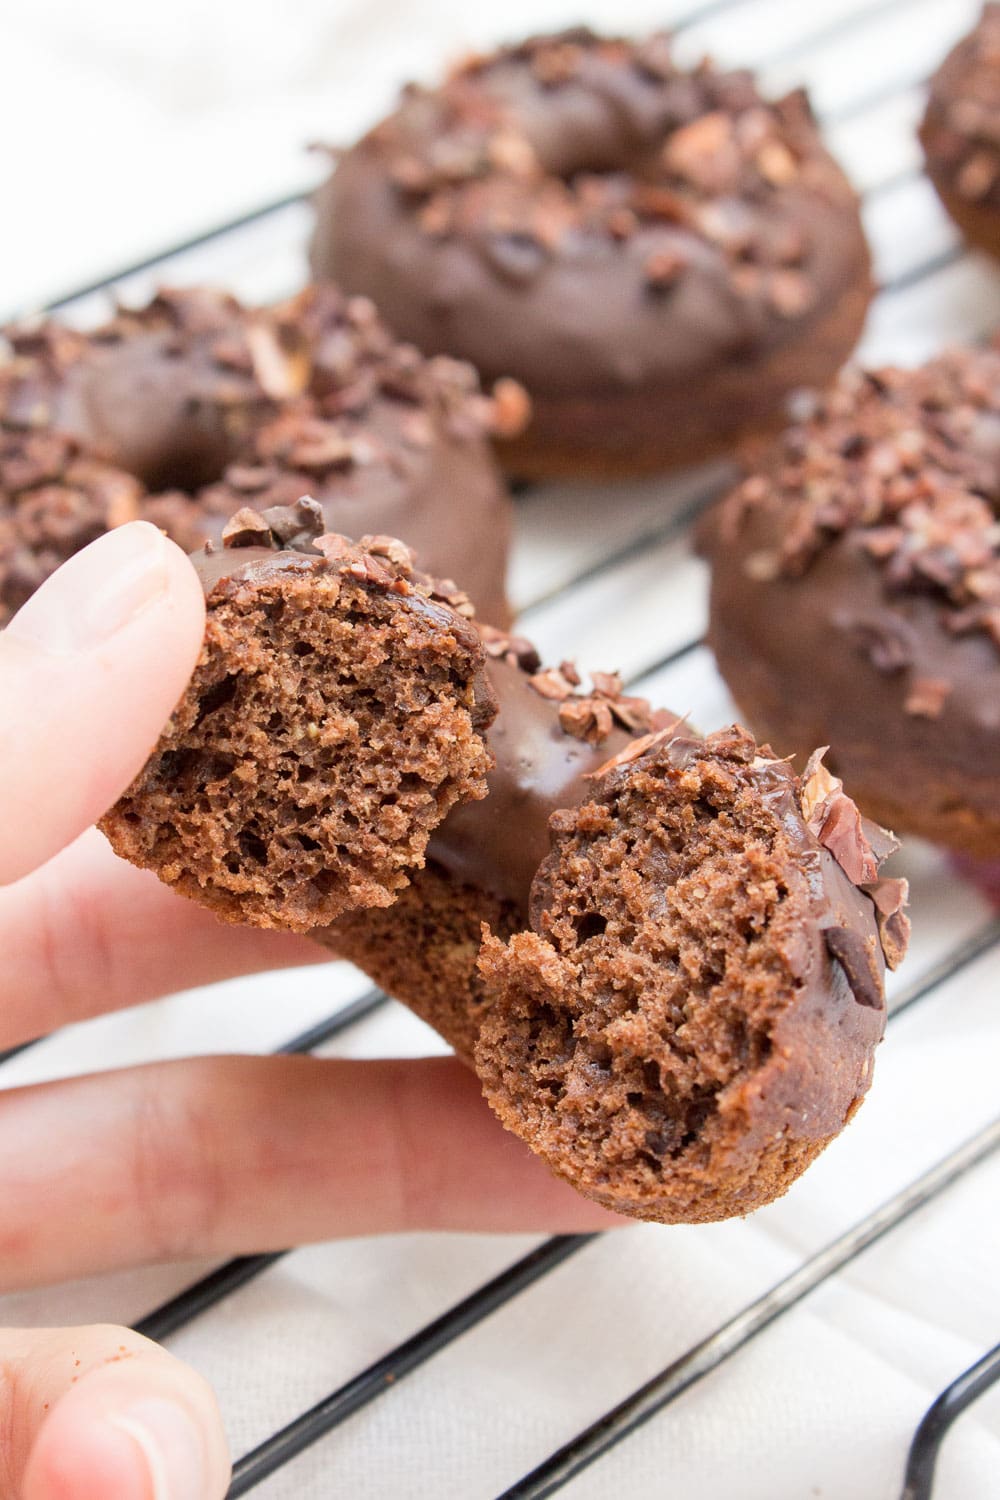 Baked whole wheat double chocolate banana donuts infused with cinnamon and topped with melted dark chocolate. These are made with all healthy ingredients, nutritious and contains no refined sugars! CLICK to read more or PIN for later! #donuts #doughnuts #healthy #easy